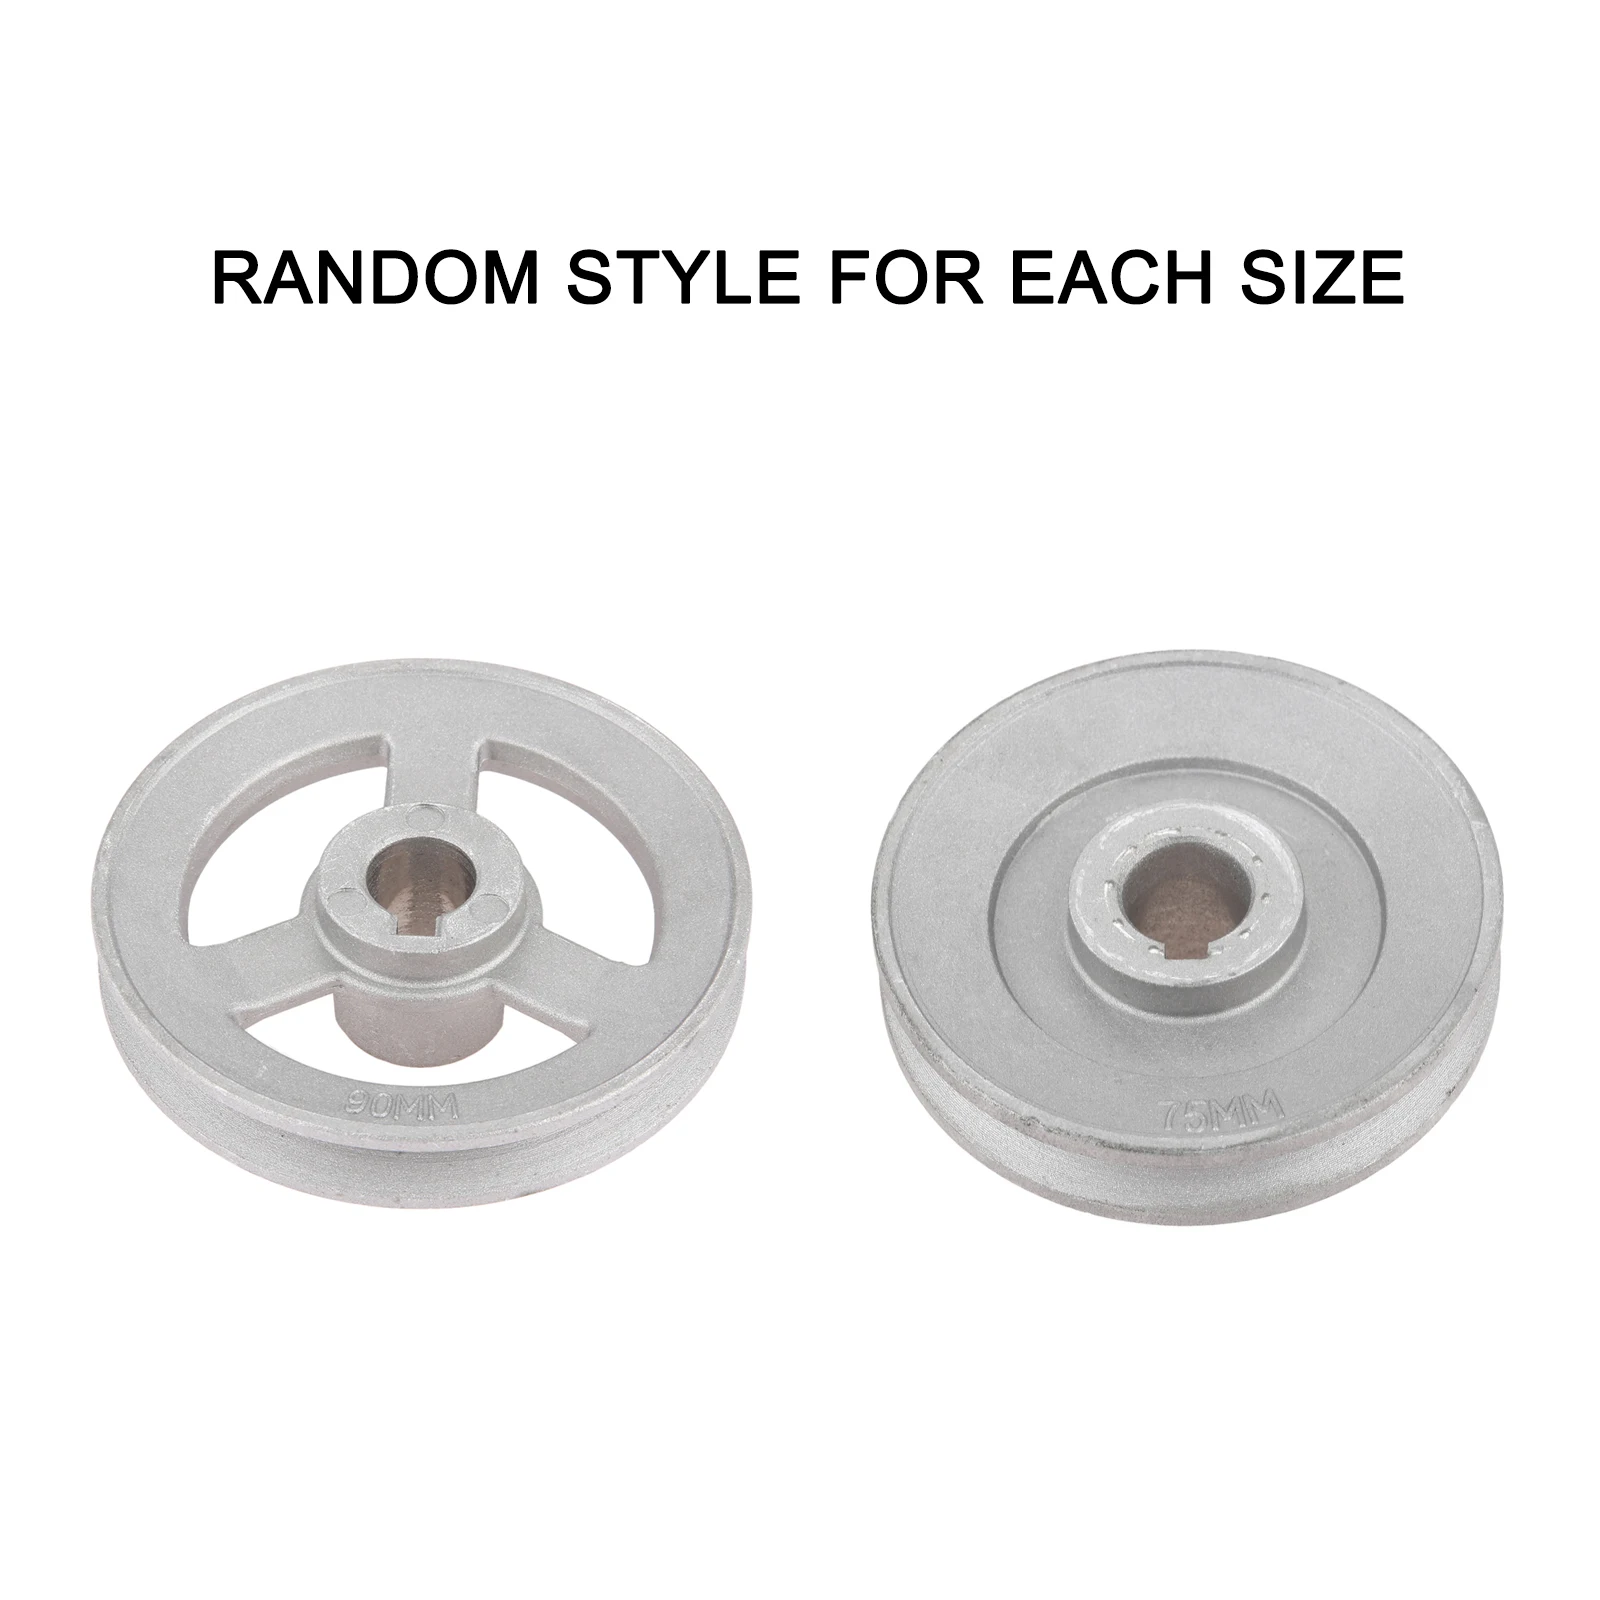 

45mm-120mm Aluminum Industrial Sewing Machine Timming Transfer Wheel Pulley Belt Motor Clutch Slow Speed Reducing Multi Size